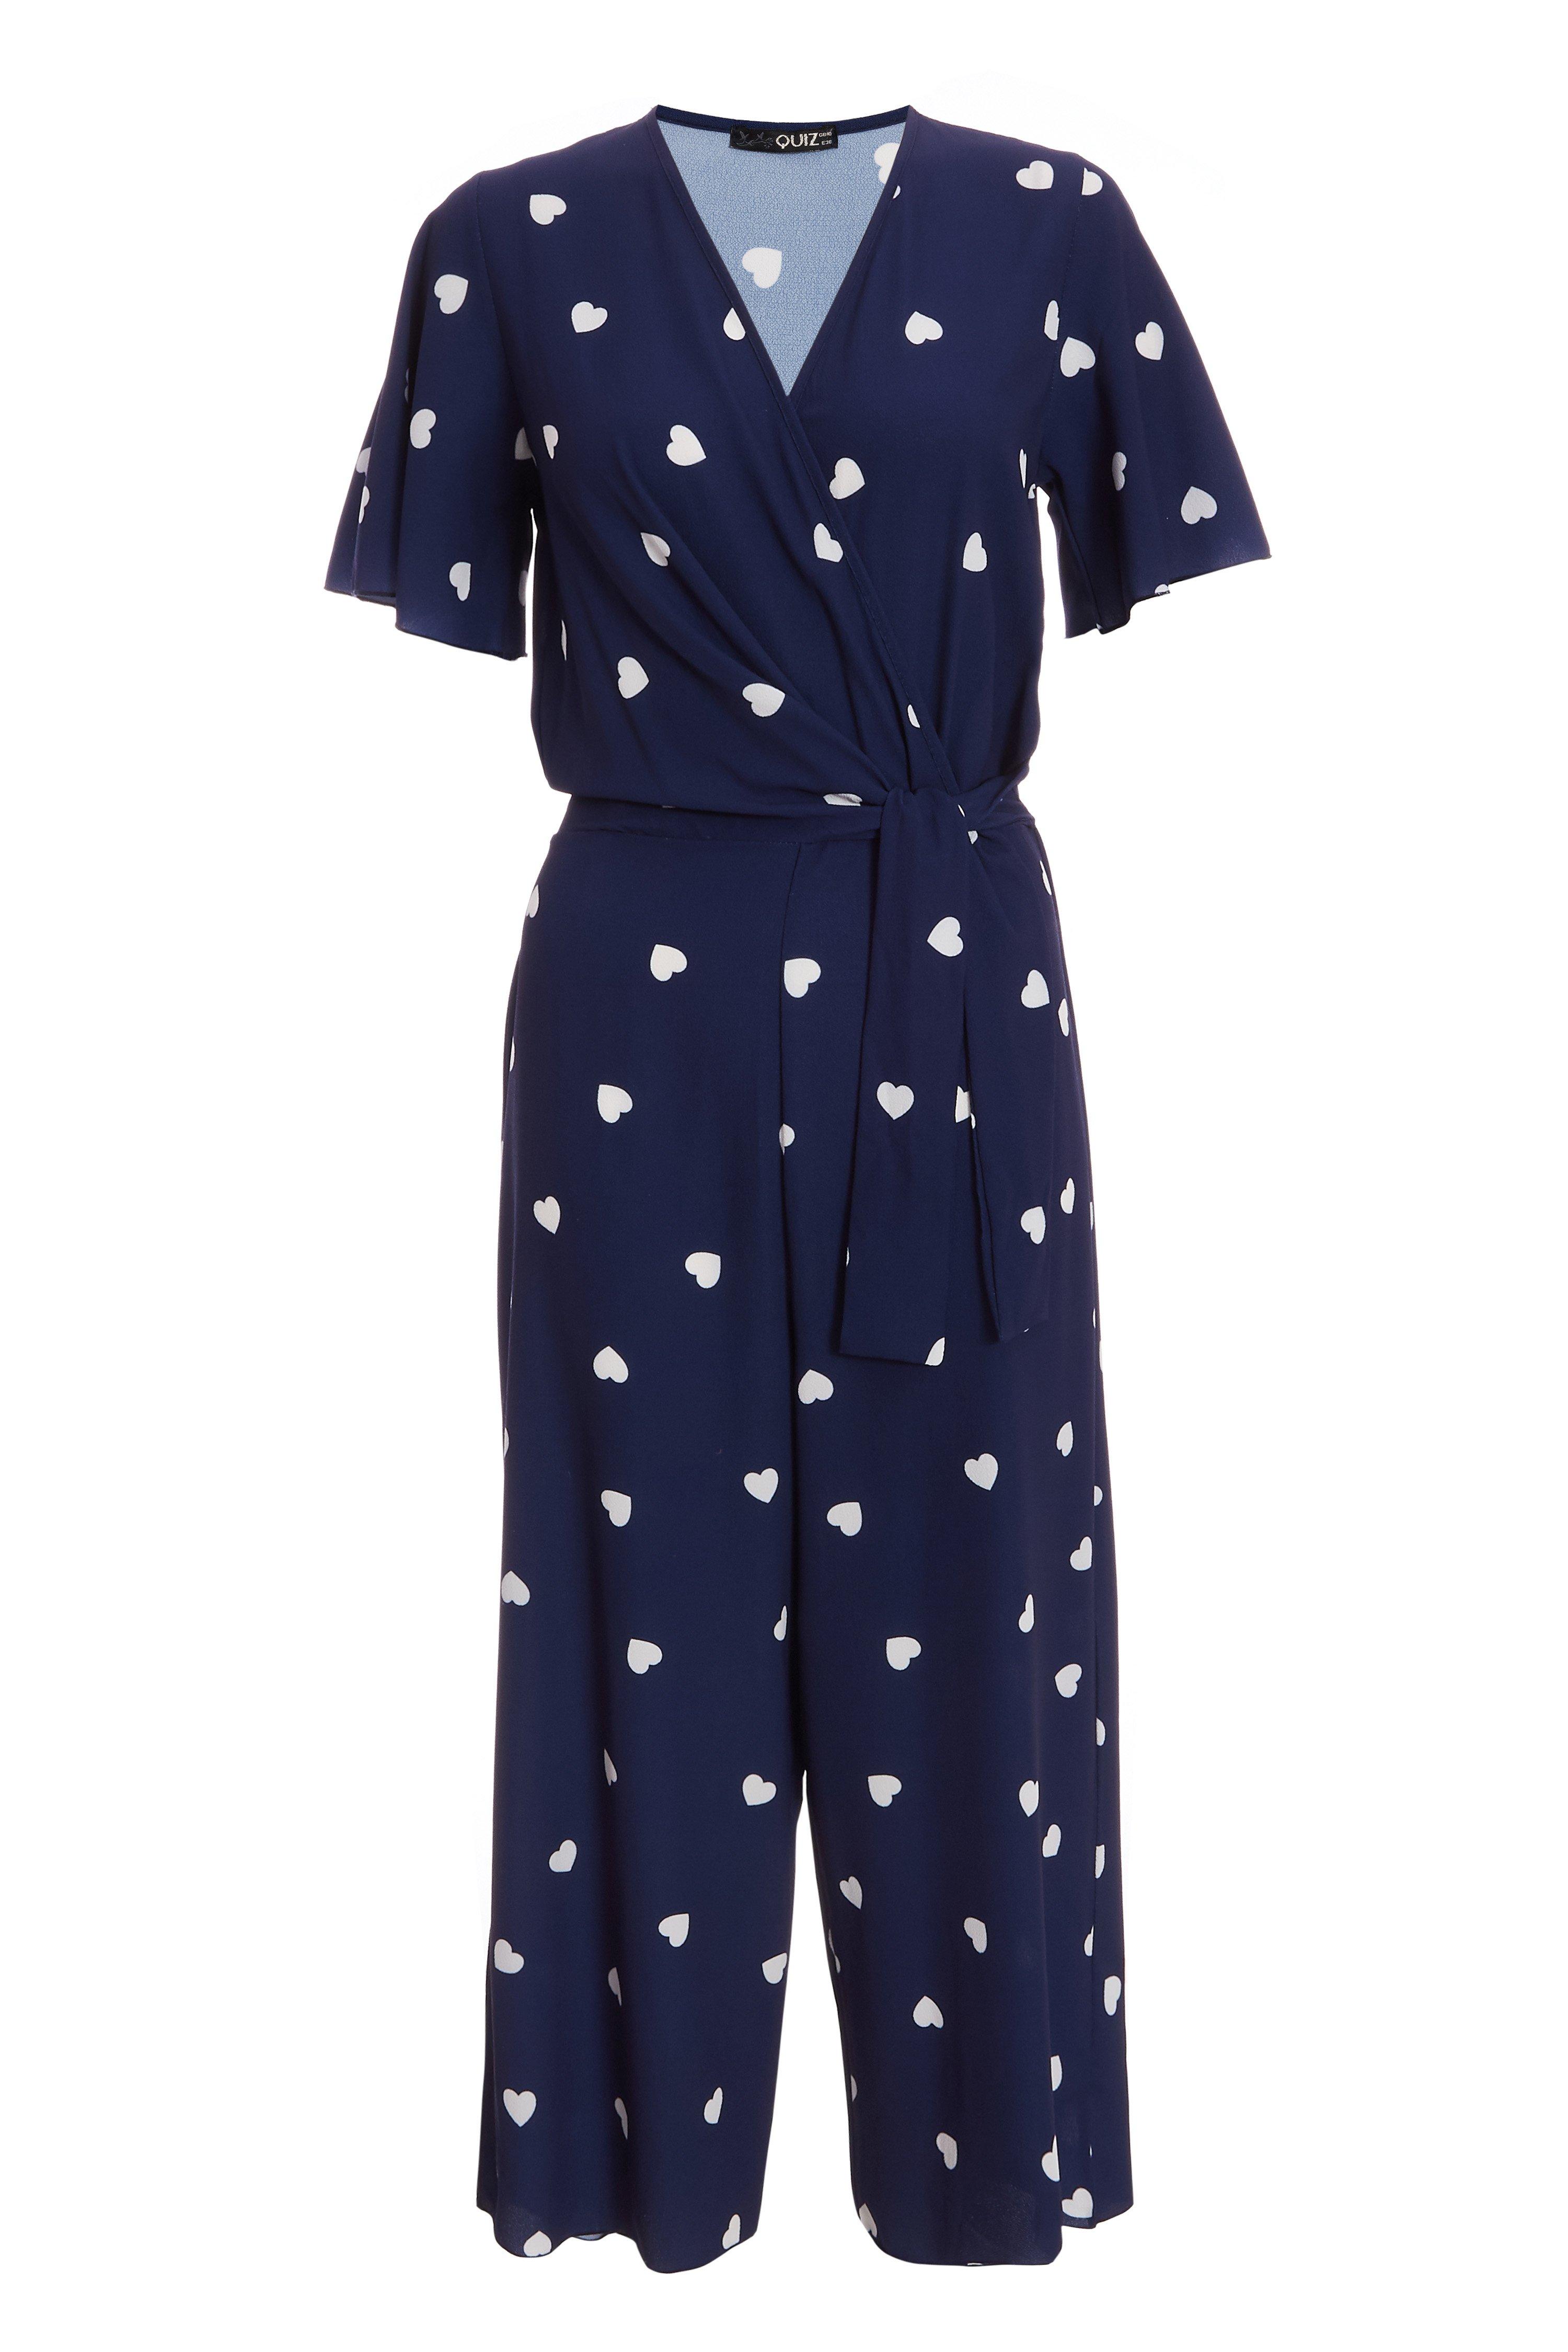 Navy and Cream Heart Print Culotte Jumpsuit - Quiz Clothing